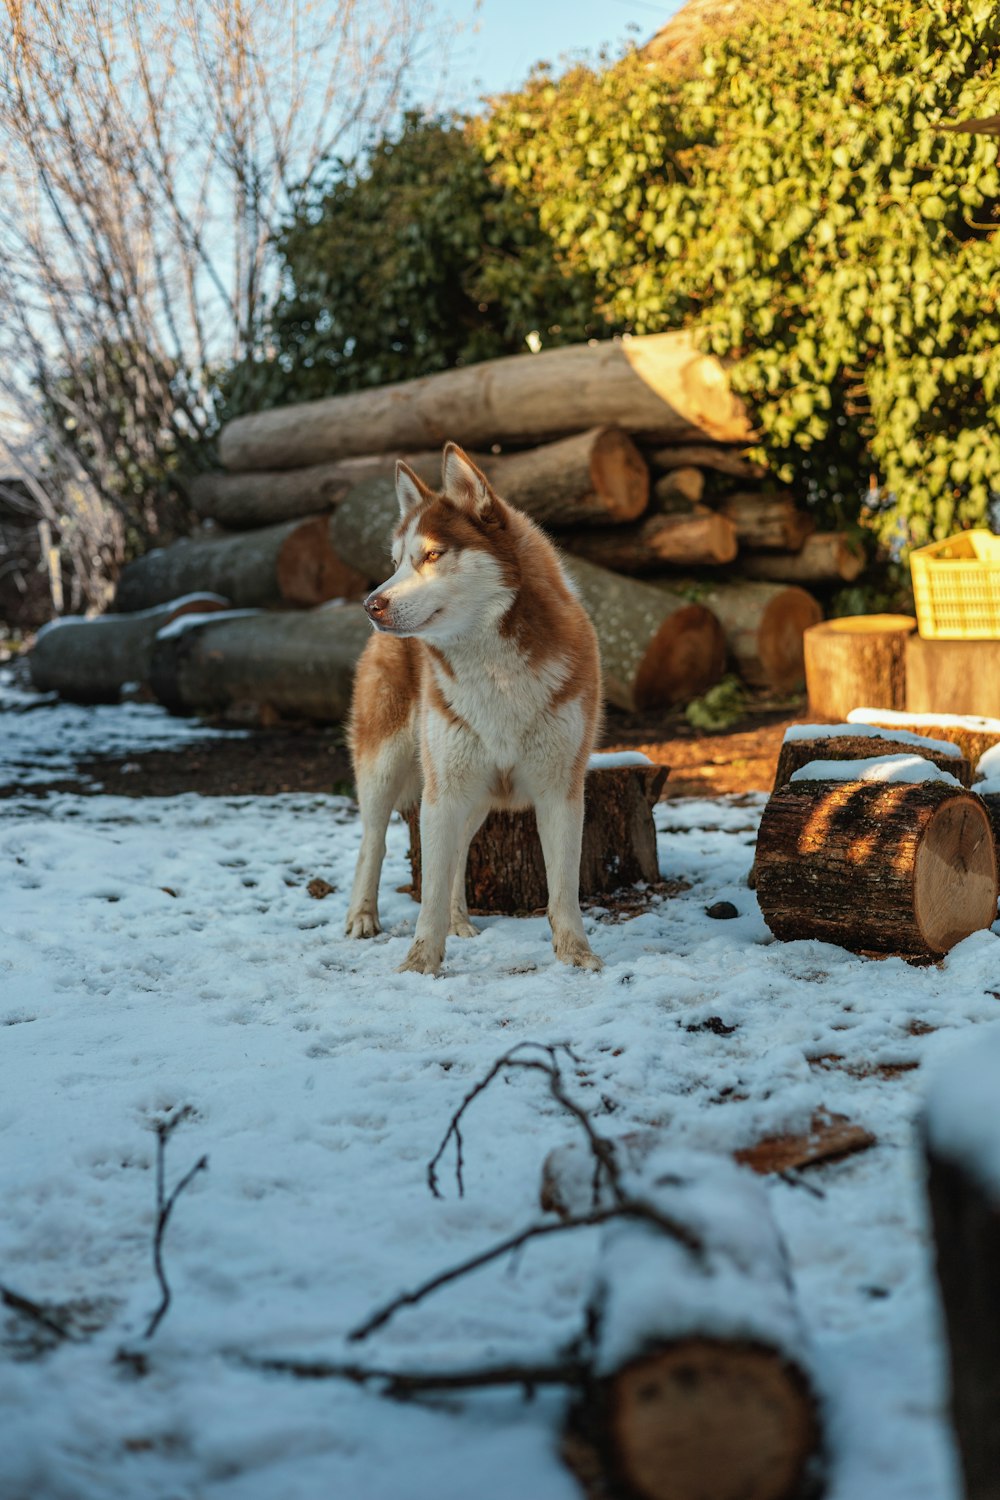 a brown and white dog standing on top of snow covered ground